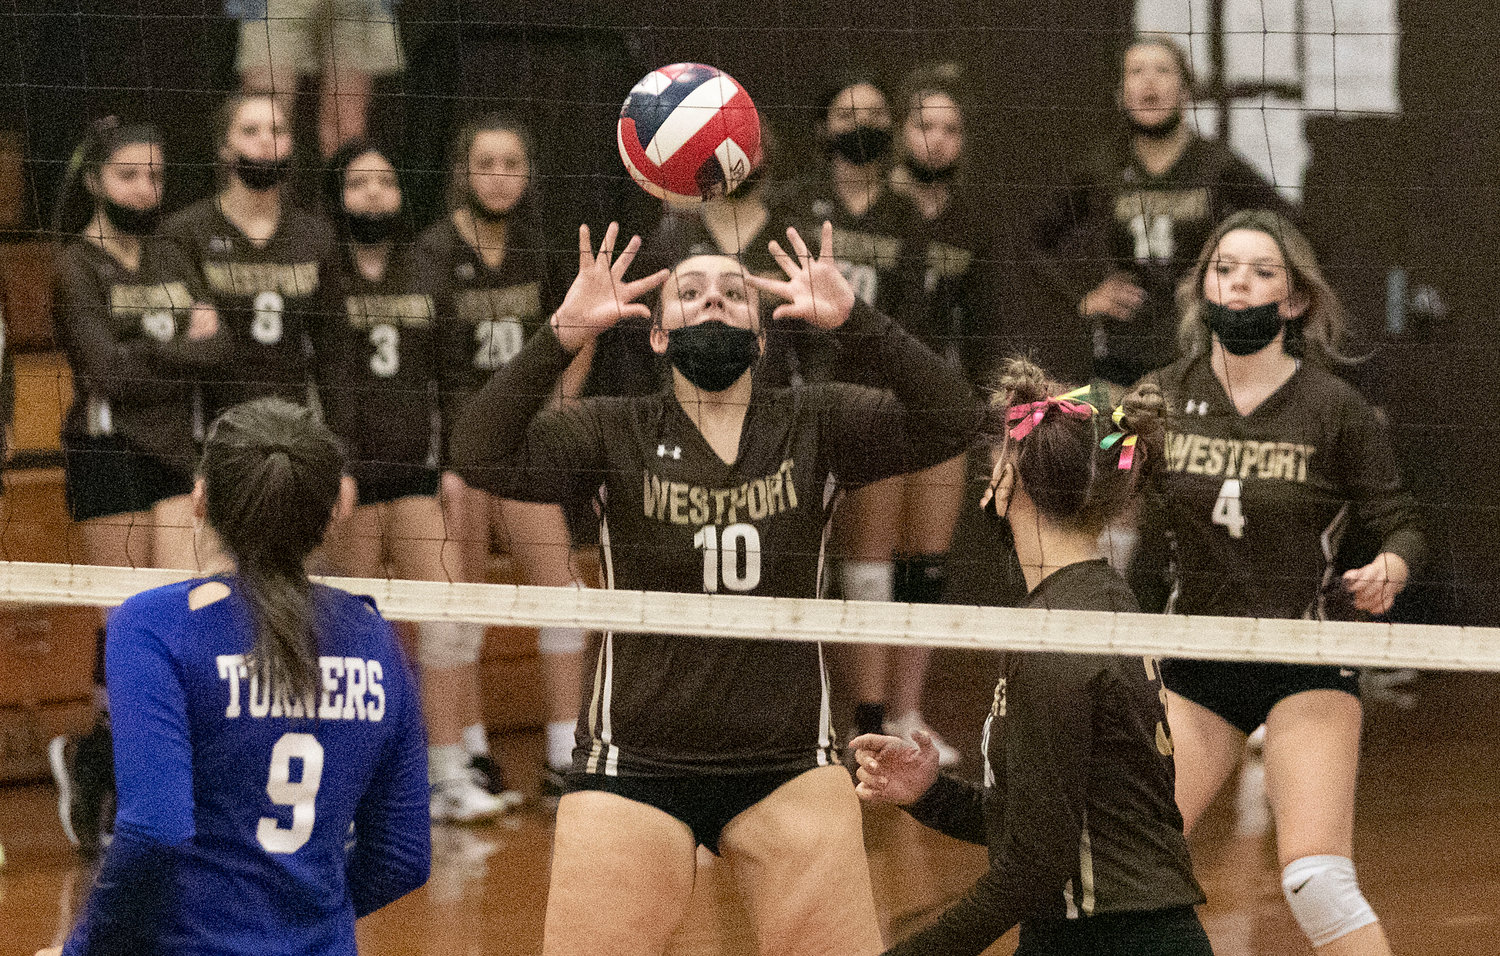 Senior setter Abby Gaudreau sets the ball during a Wildcats rally. Gaudreau tallied five kills and eighteen assists during the loss.